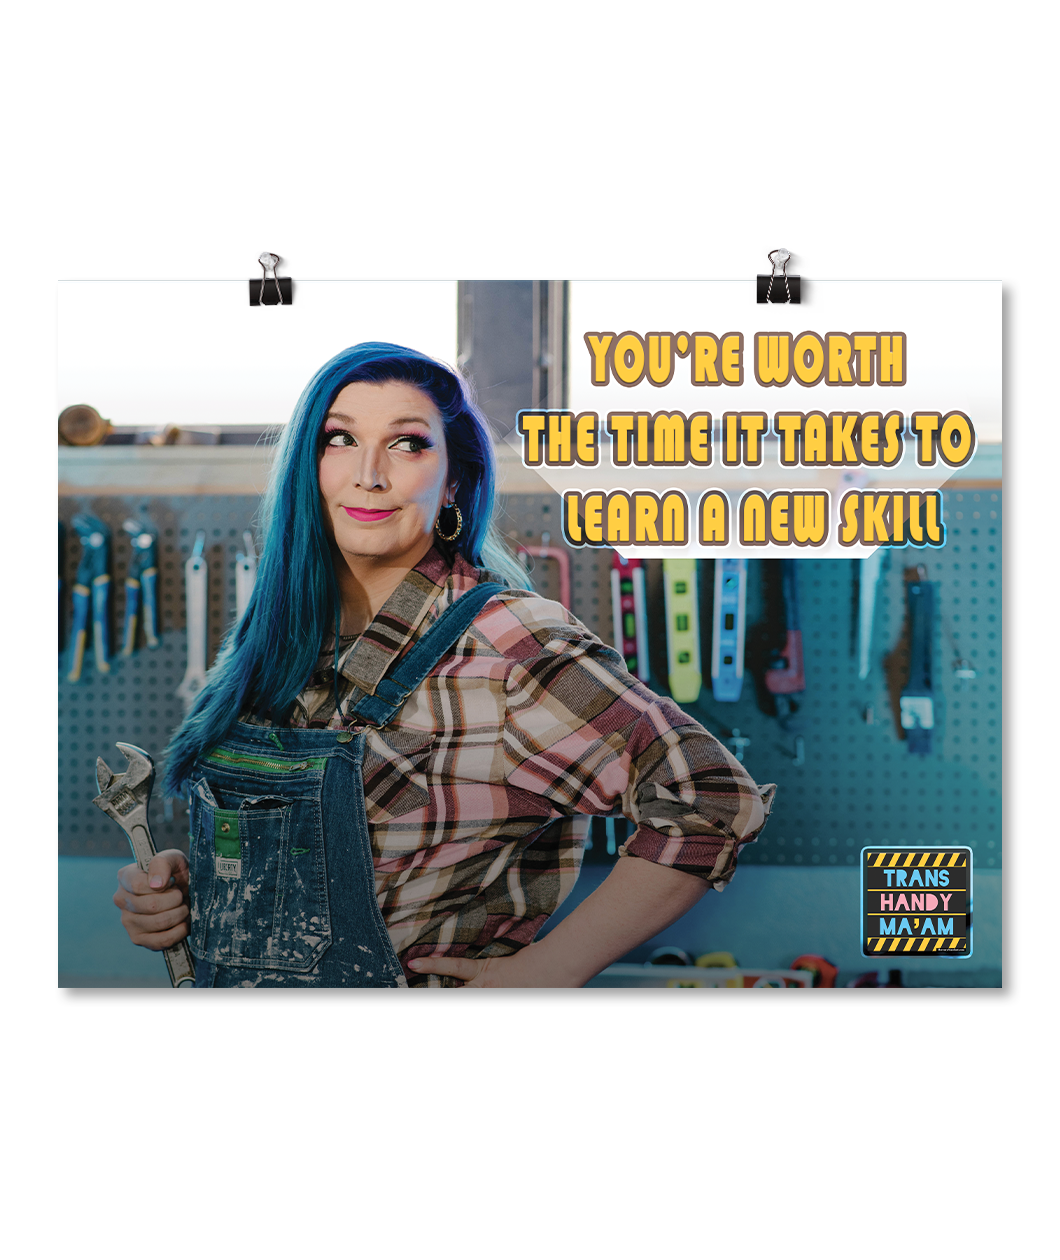 Poster of woman with blue hair (Mercury) holding a wrench in her workshop looking up at the phrase, 